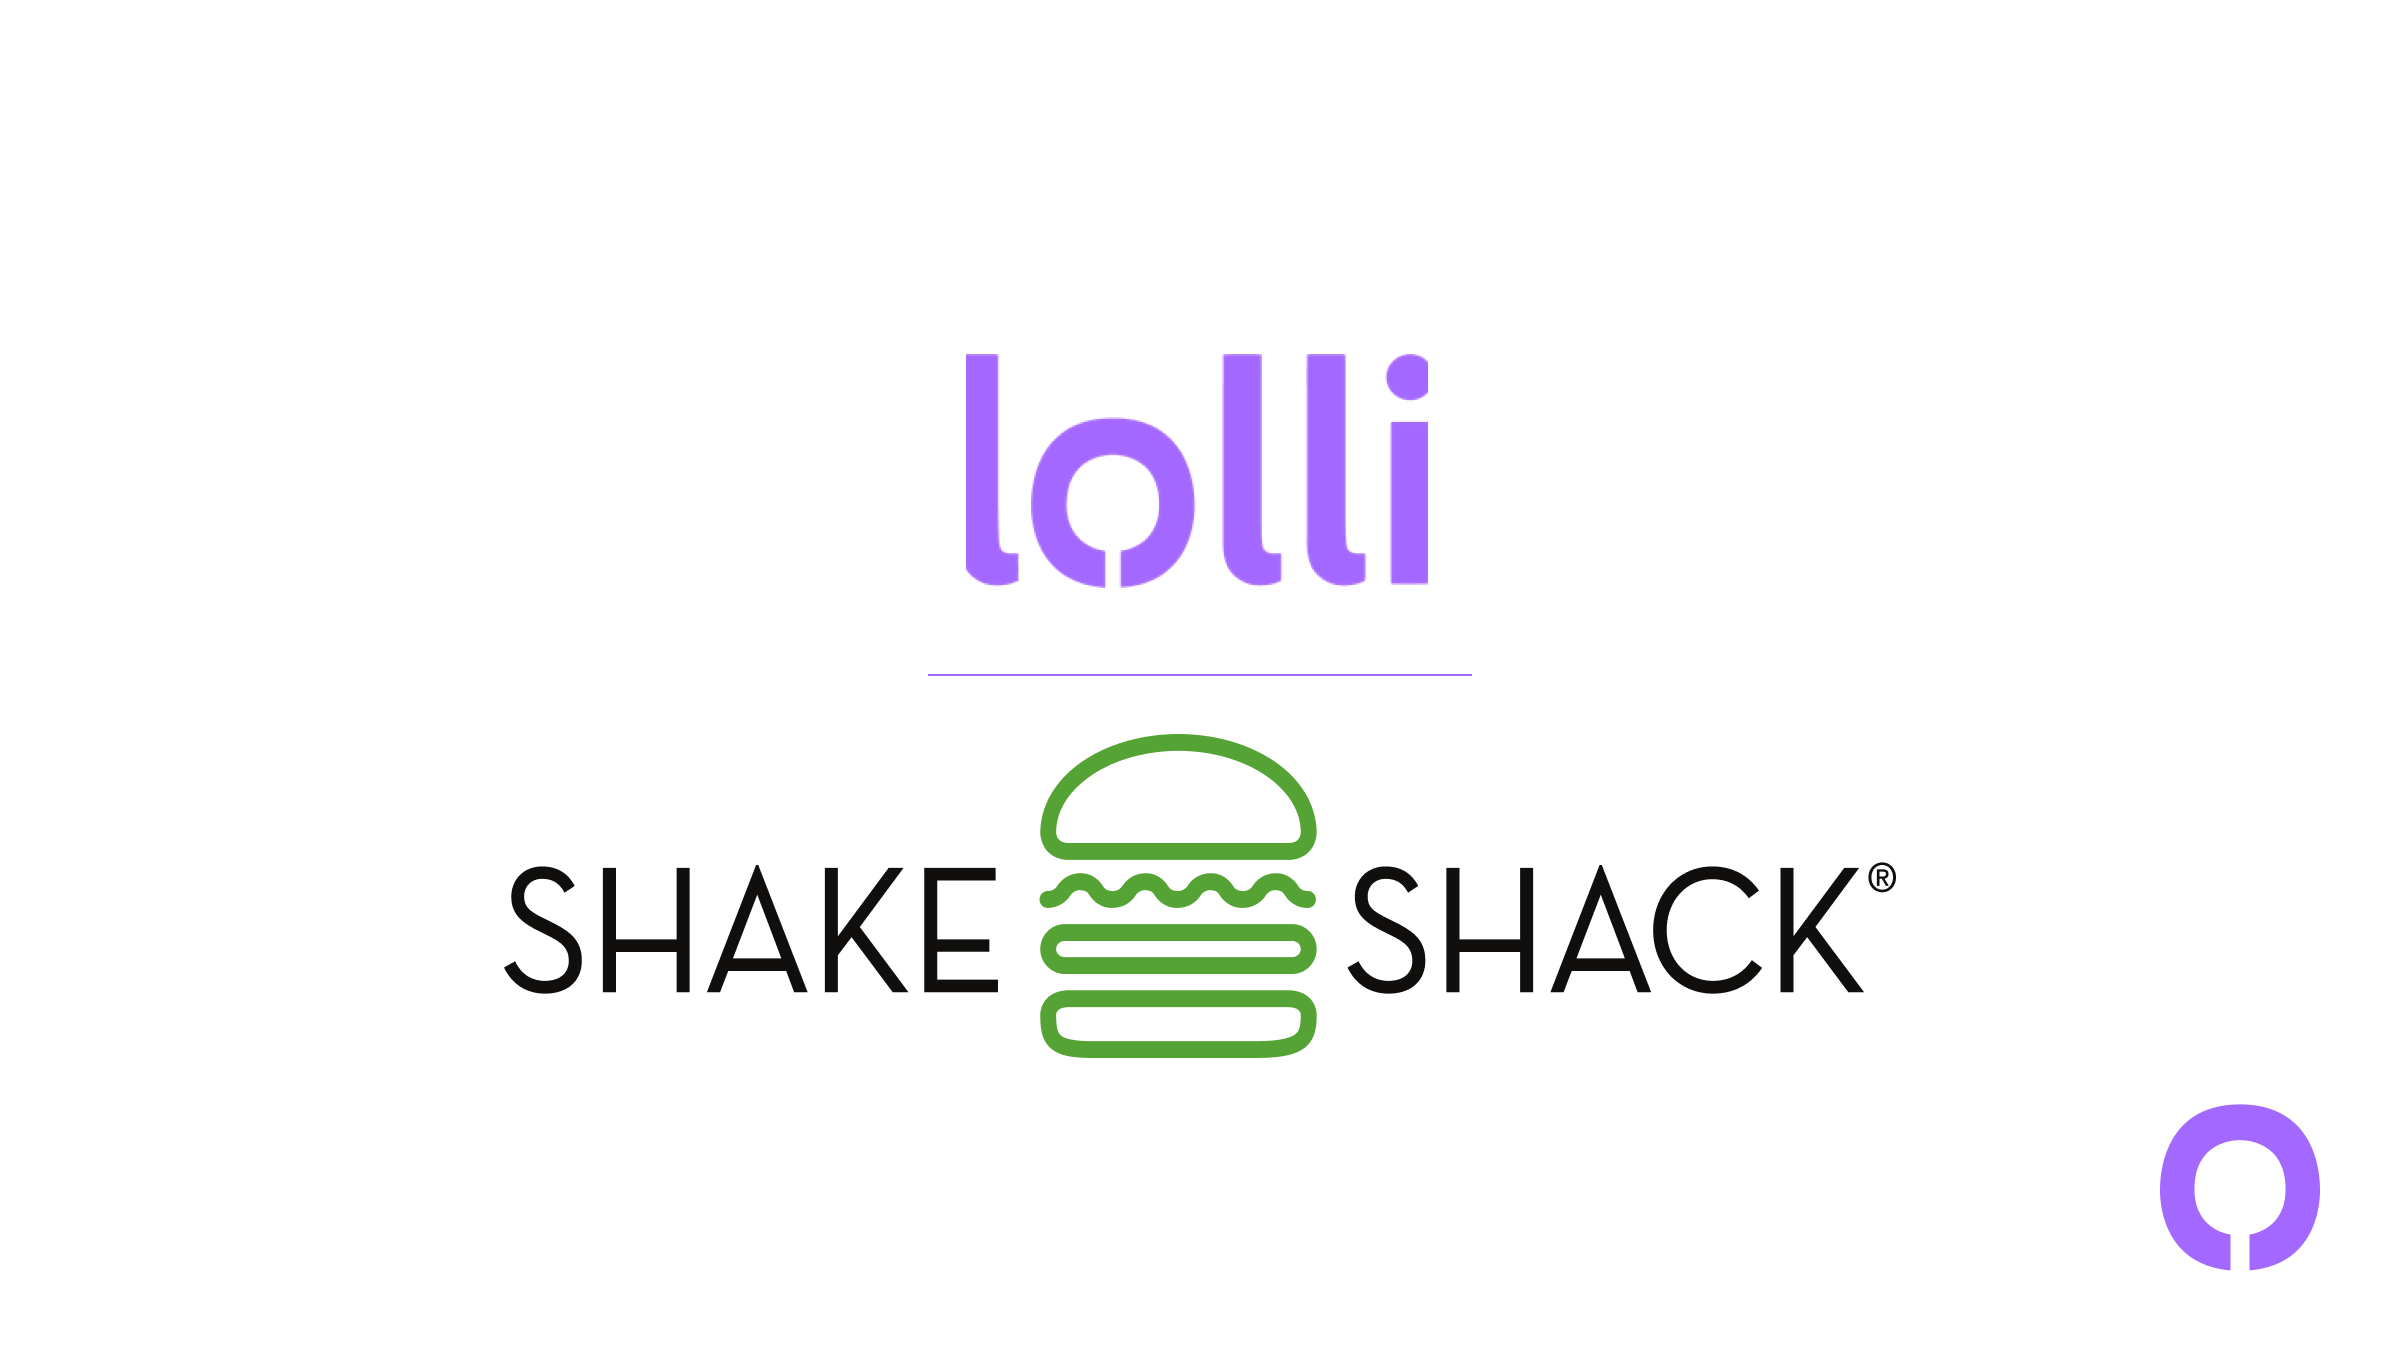 BREAKING: LOLLI PARTNERS WITH SHAKE SHACK TO OFFER BITCOIN REWARDS